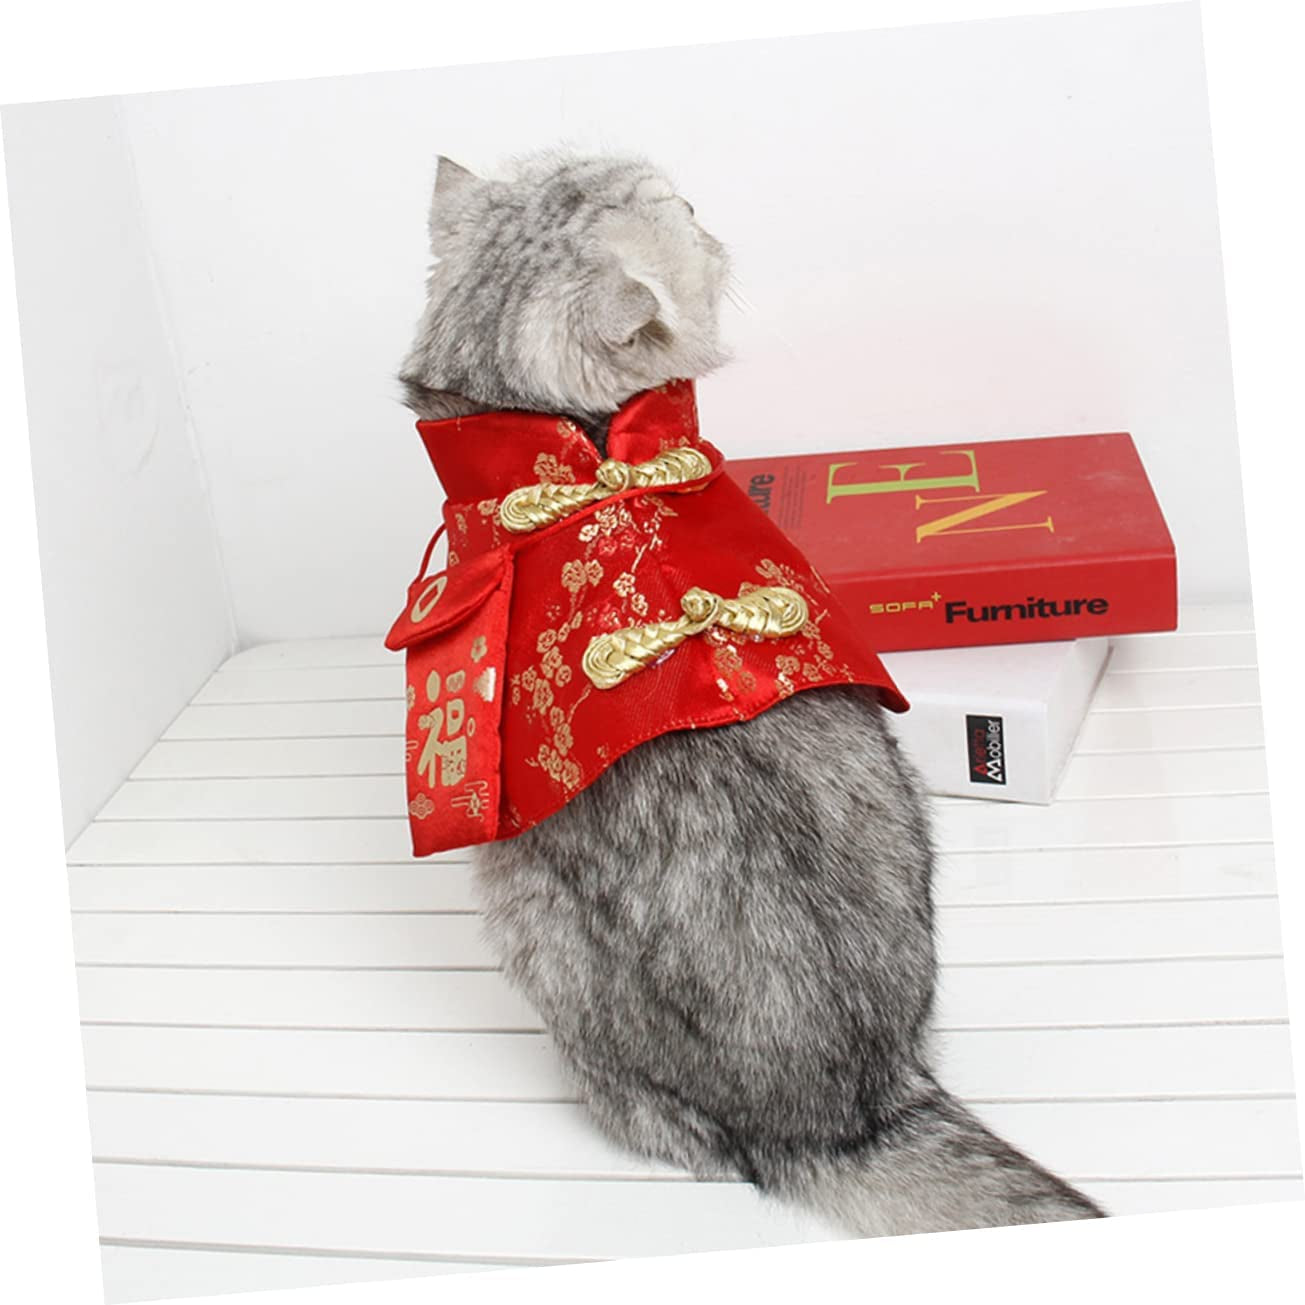 Balacoo 1Pc Joyous Year Clothes Dogs Envelope Coat L New Cosplay Dress Size Style Cloak Comfortable Costume Cape Decorative Pets Dynasty Chinese Small Delicate Red Pet up Cat Dog Animals & Pet Supplies > Pet Supplies > Dog Supplies > Dog Apparel Balacoo   